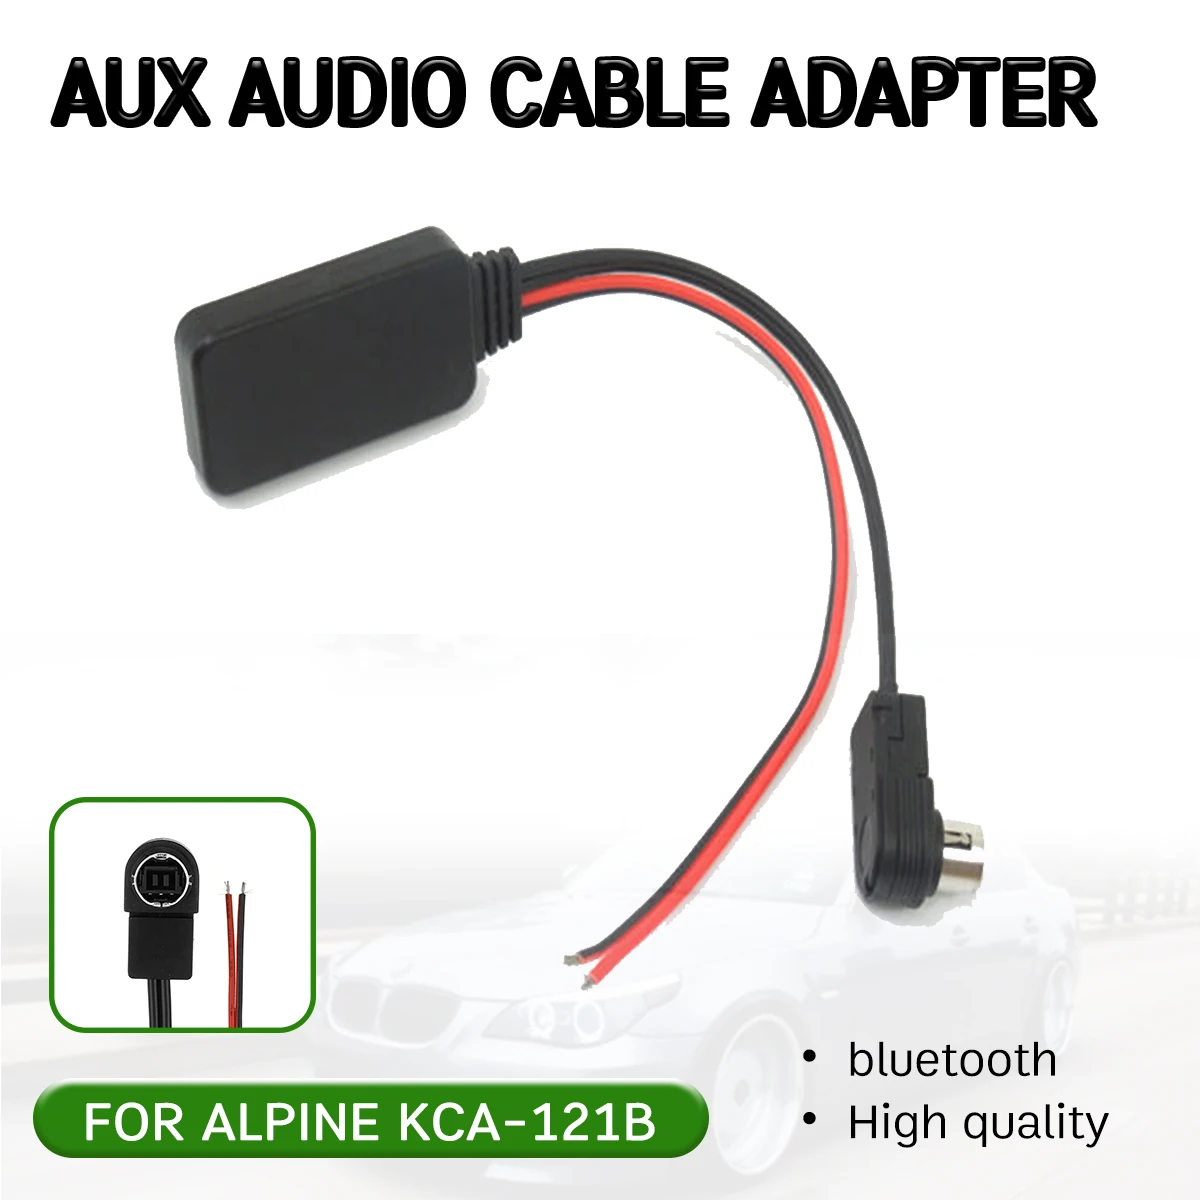 Bluetooth Aux Receiver Cable For Alpine Kca-121b For Alpine 9887/105/117/9855/305s 13 Pin Audio Head Unit - Cables, Adapters & Sockets - AliExpress